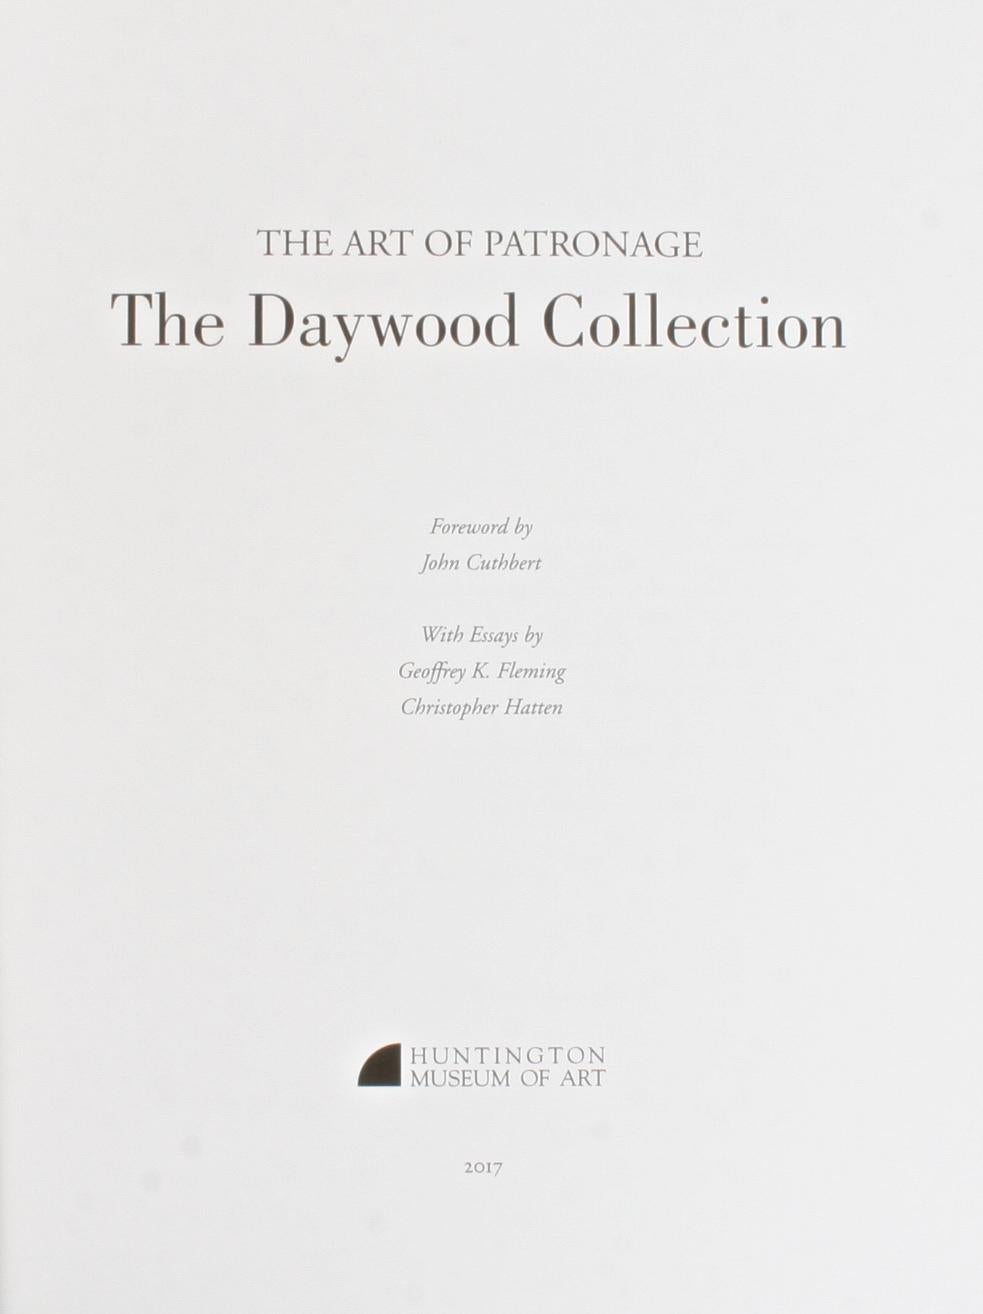 The Art of Patronage, The Daywood Collection. Charleston: Huntington Museum of Art, 2017. First Edition hardcover with dust jacket. 122 pp. A catalogue of works from The Daywood Collection at the Huntington Museum of Art. The collection includes